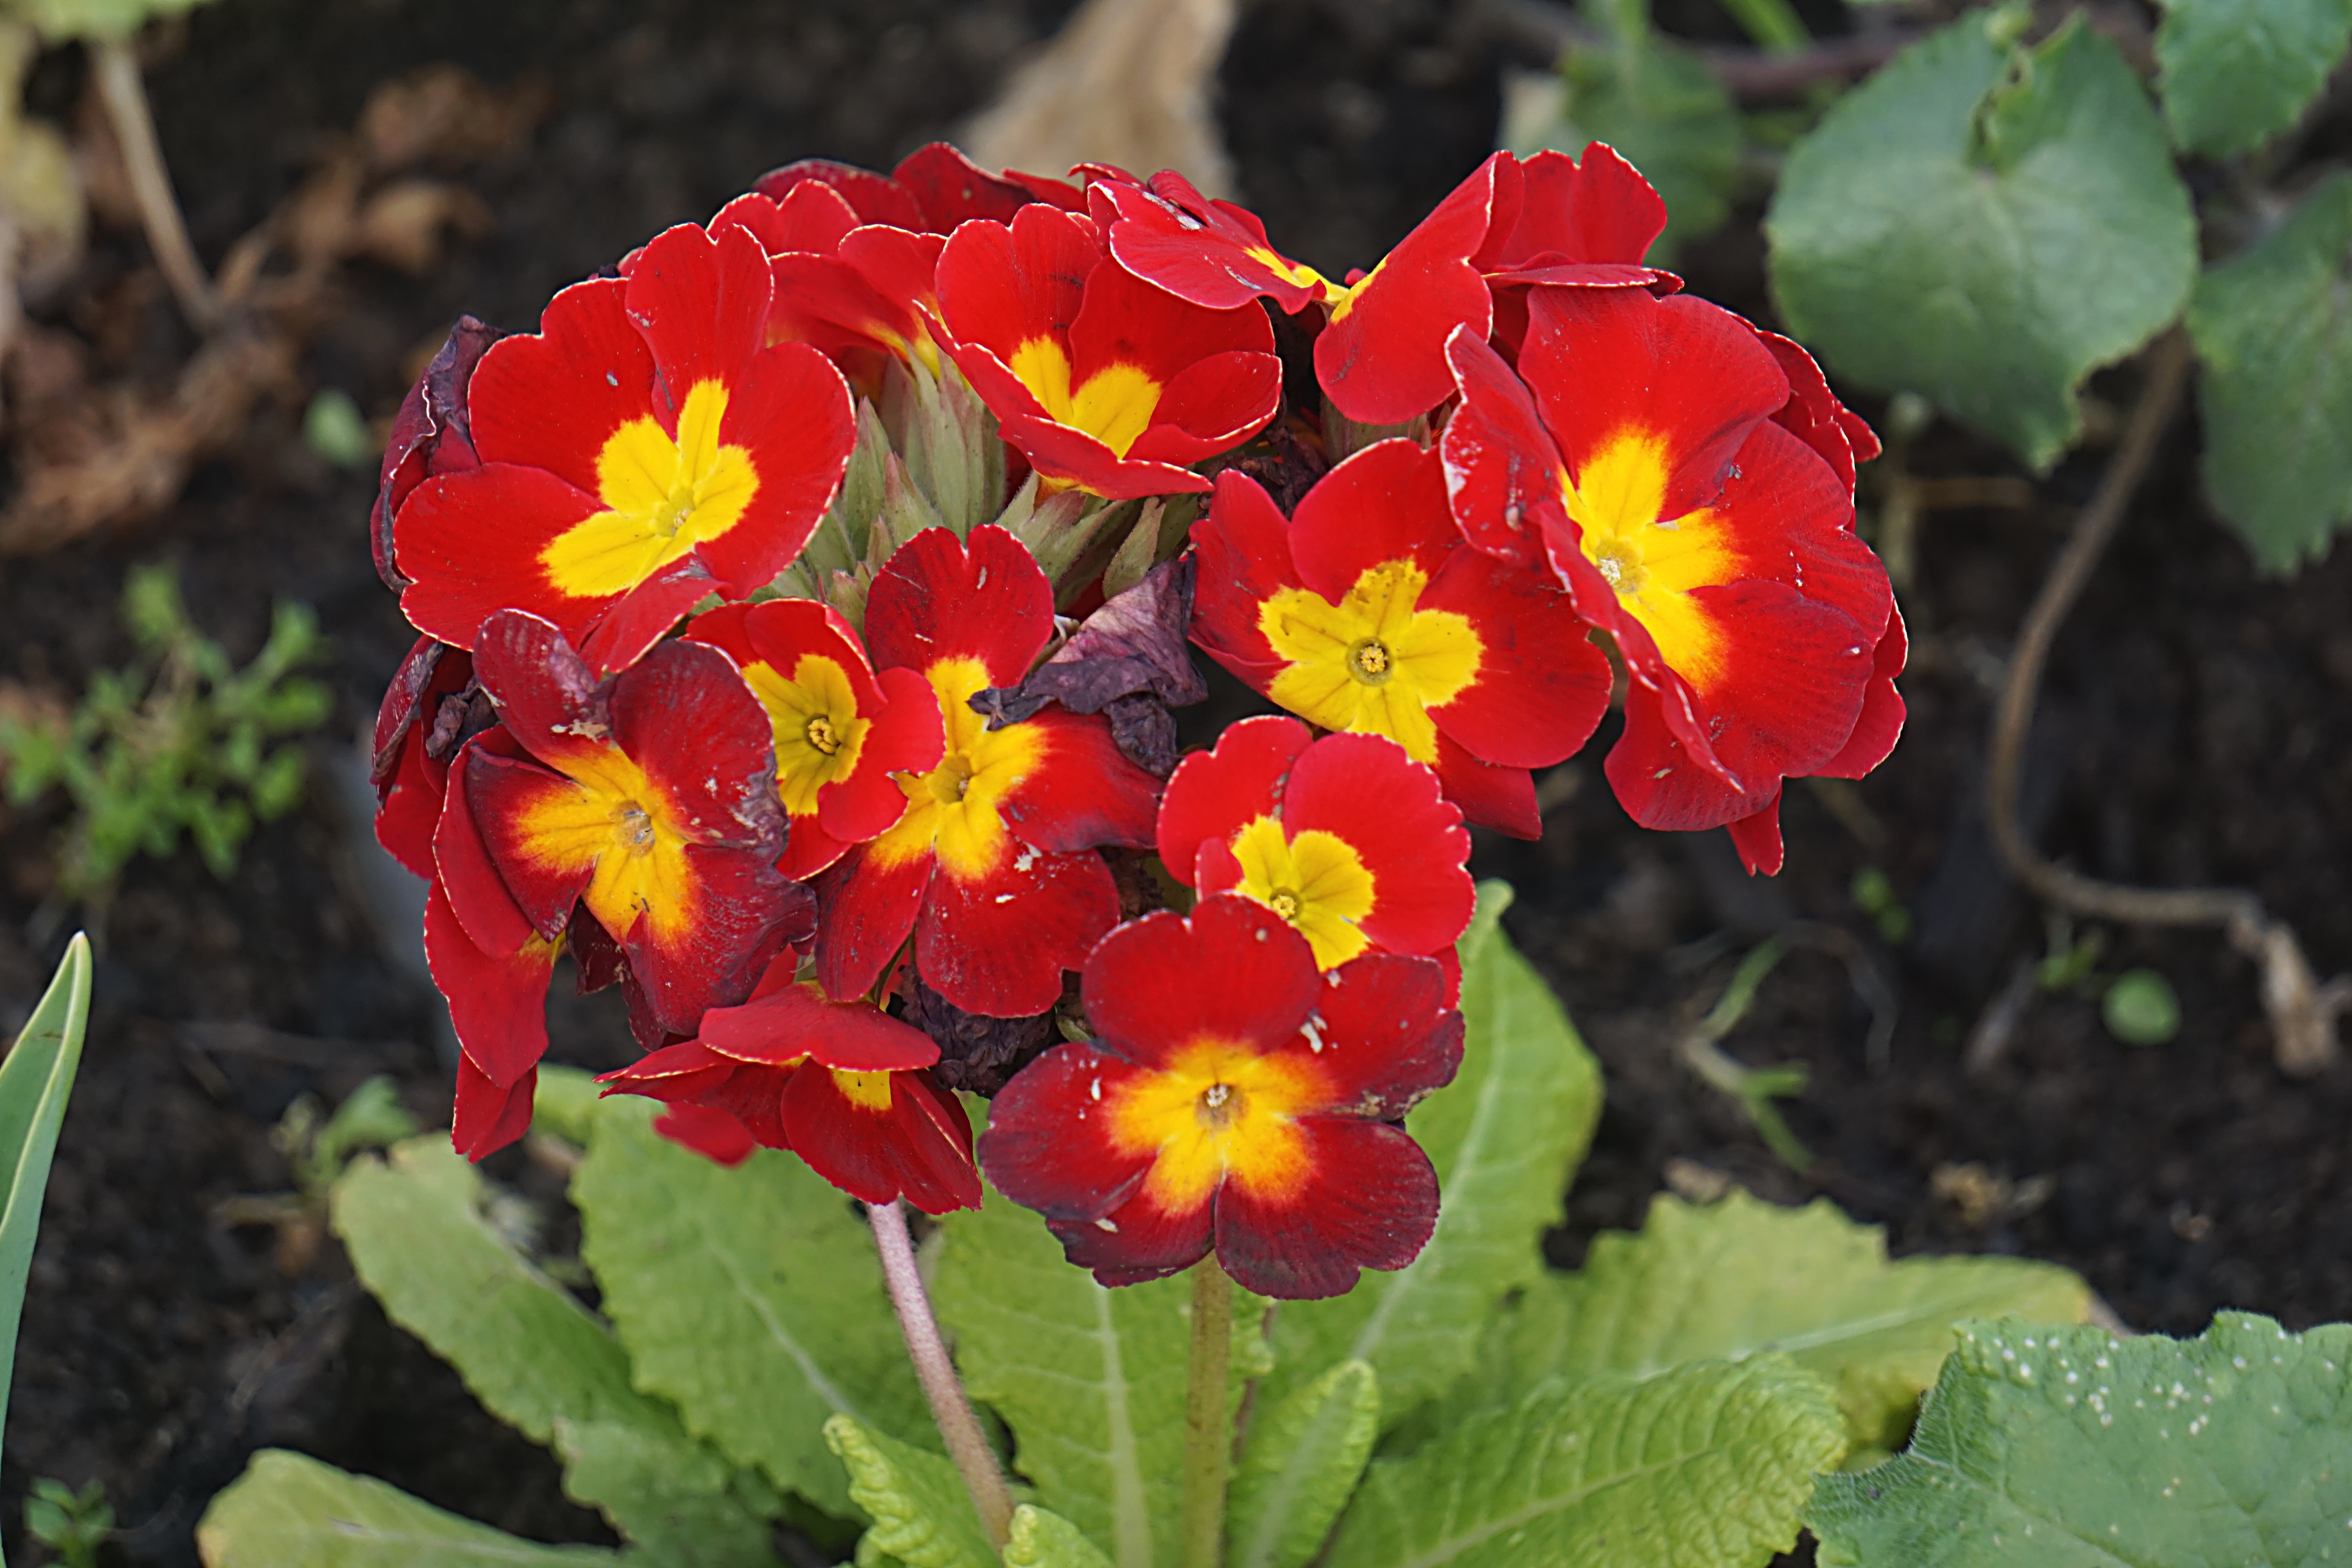 yellow and red 5 petaled flowers